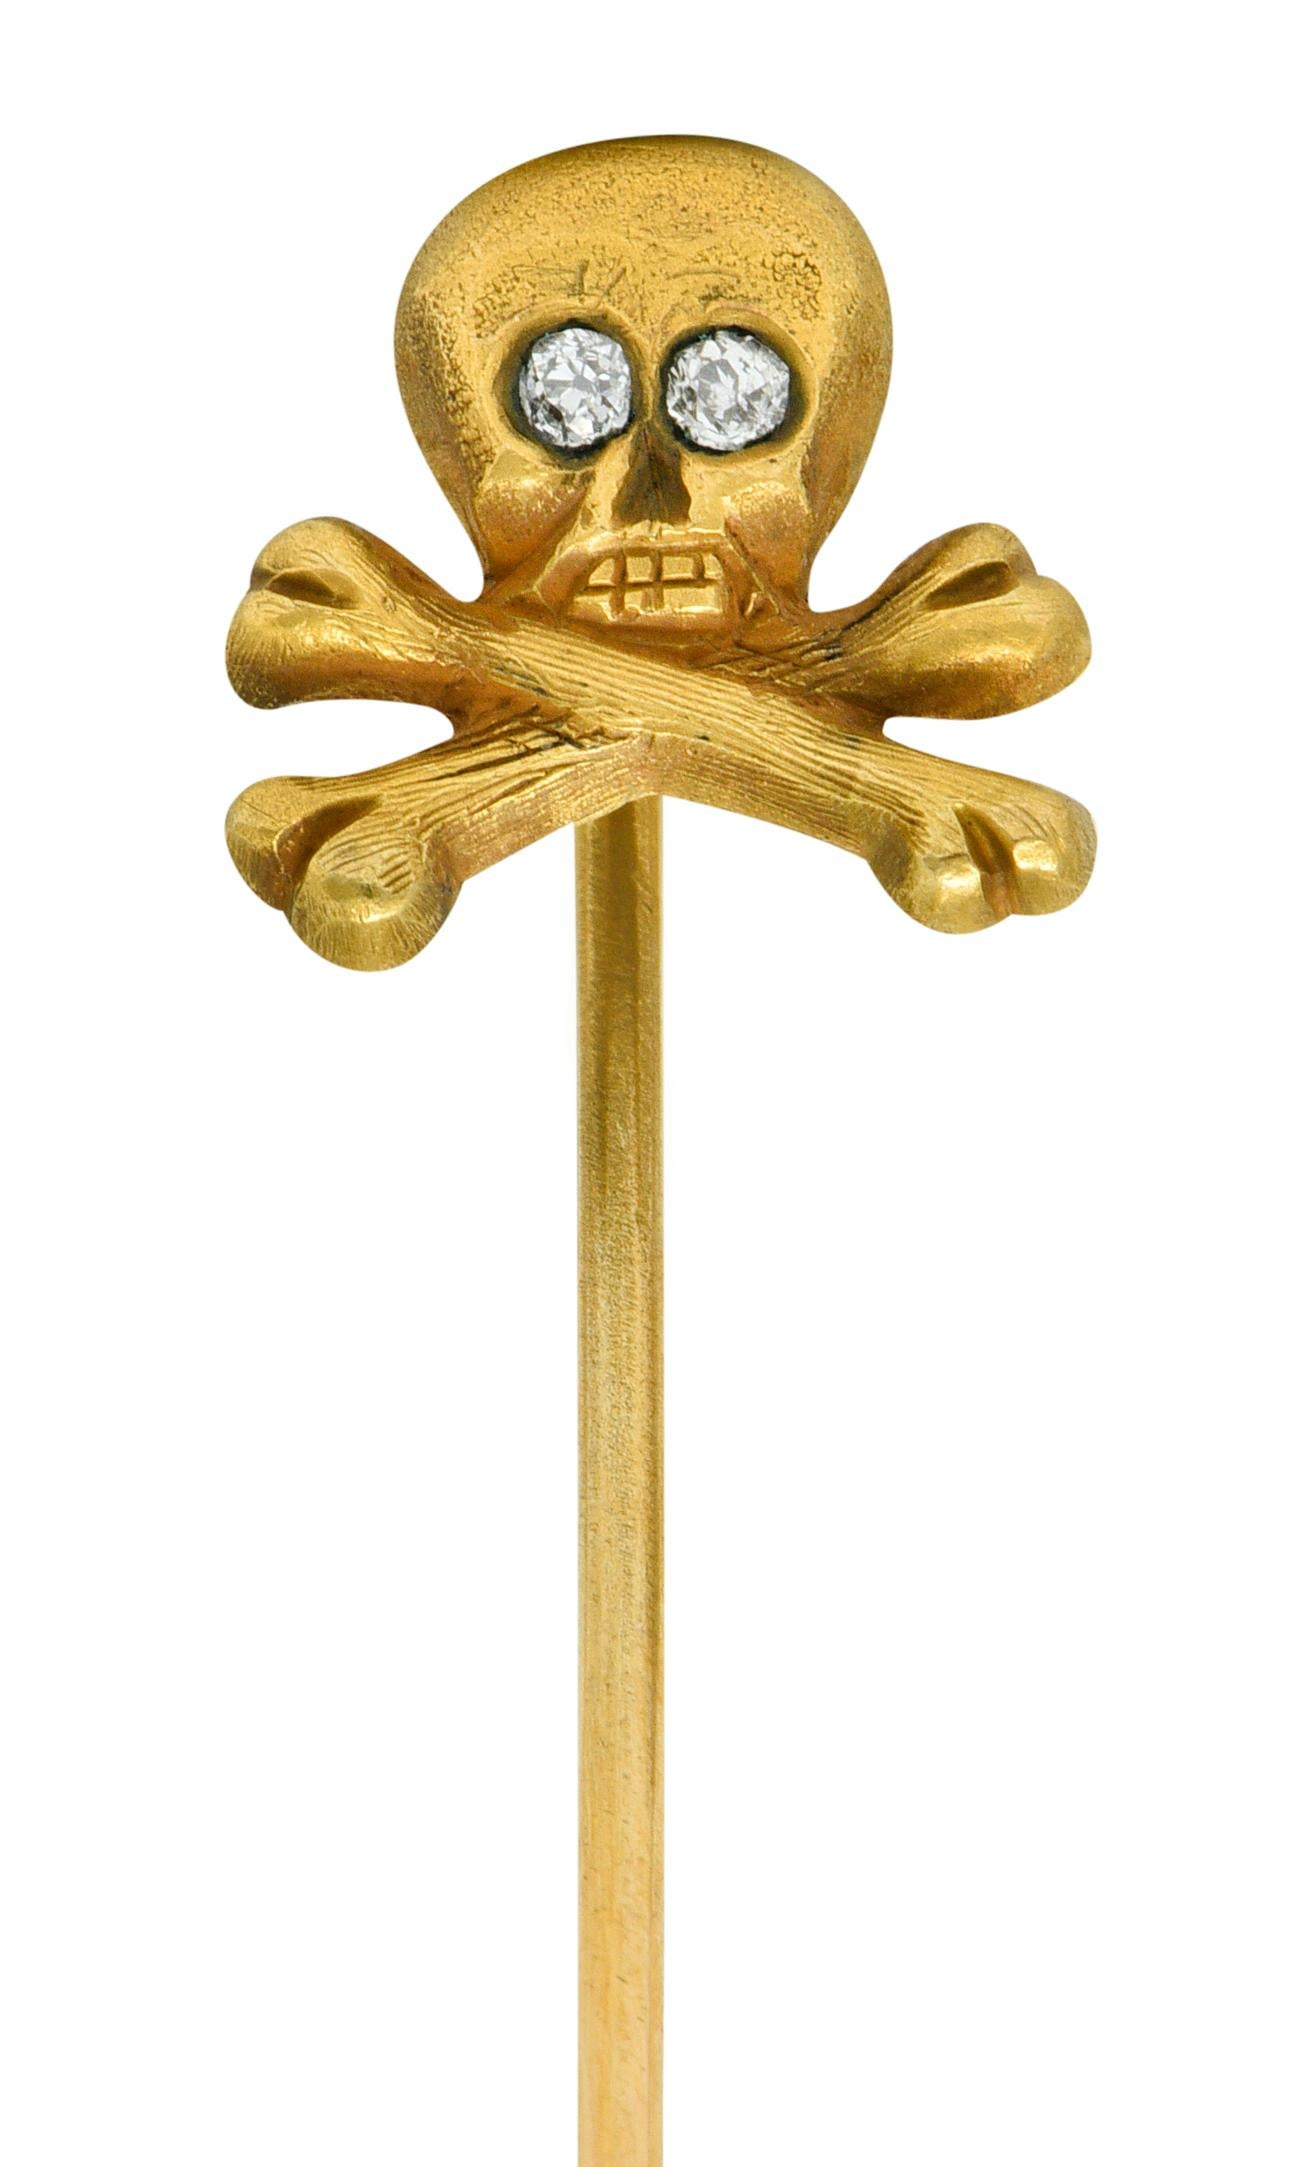 Designed as a grimacing skull with a crossed bone base; matte gold

Accented with old European cut diamond eyes, weighing in total approximately 0.05 carat

Tested as 14 karat gold

Circa: 1890

Head measures: 7/16 x 7/16 inch

Total length: 2 3/8